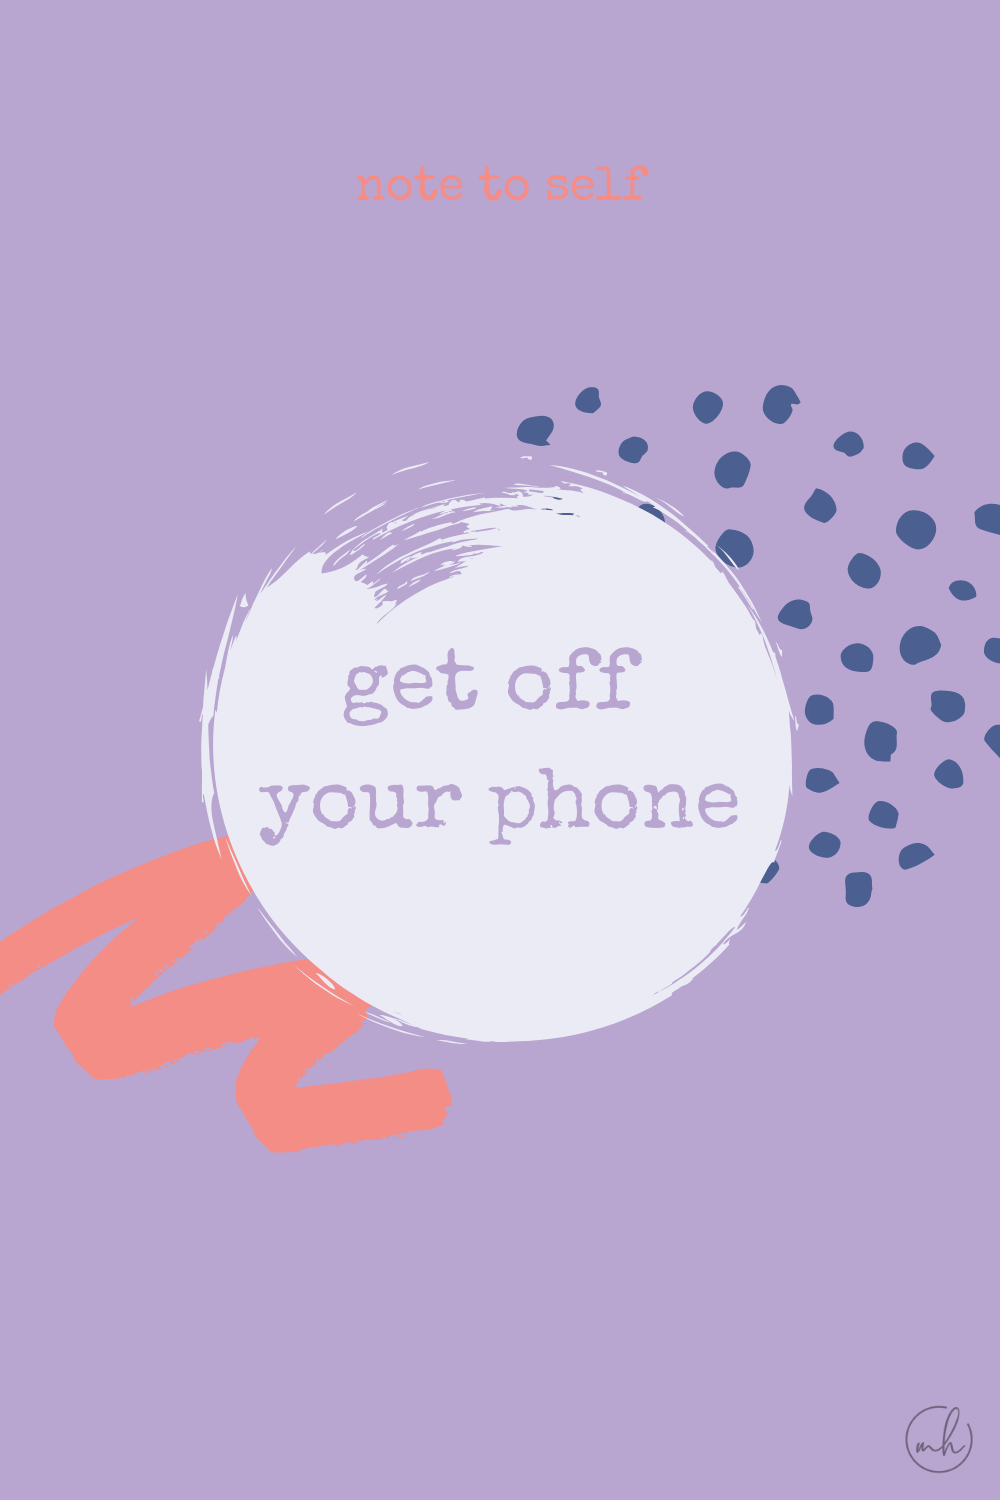 Get off your phone - Note to self quotes | myhoogah